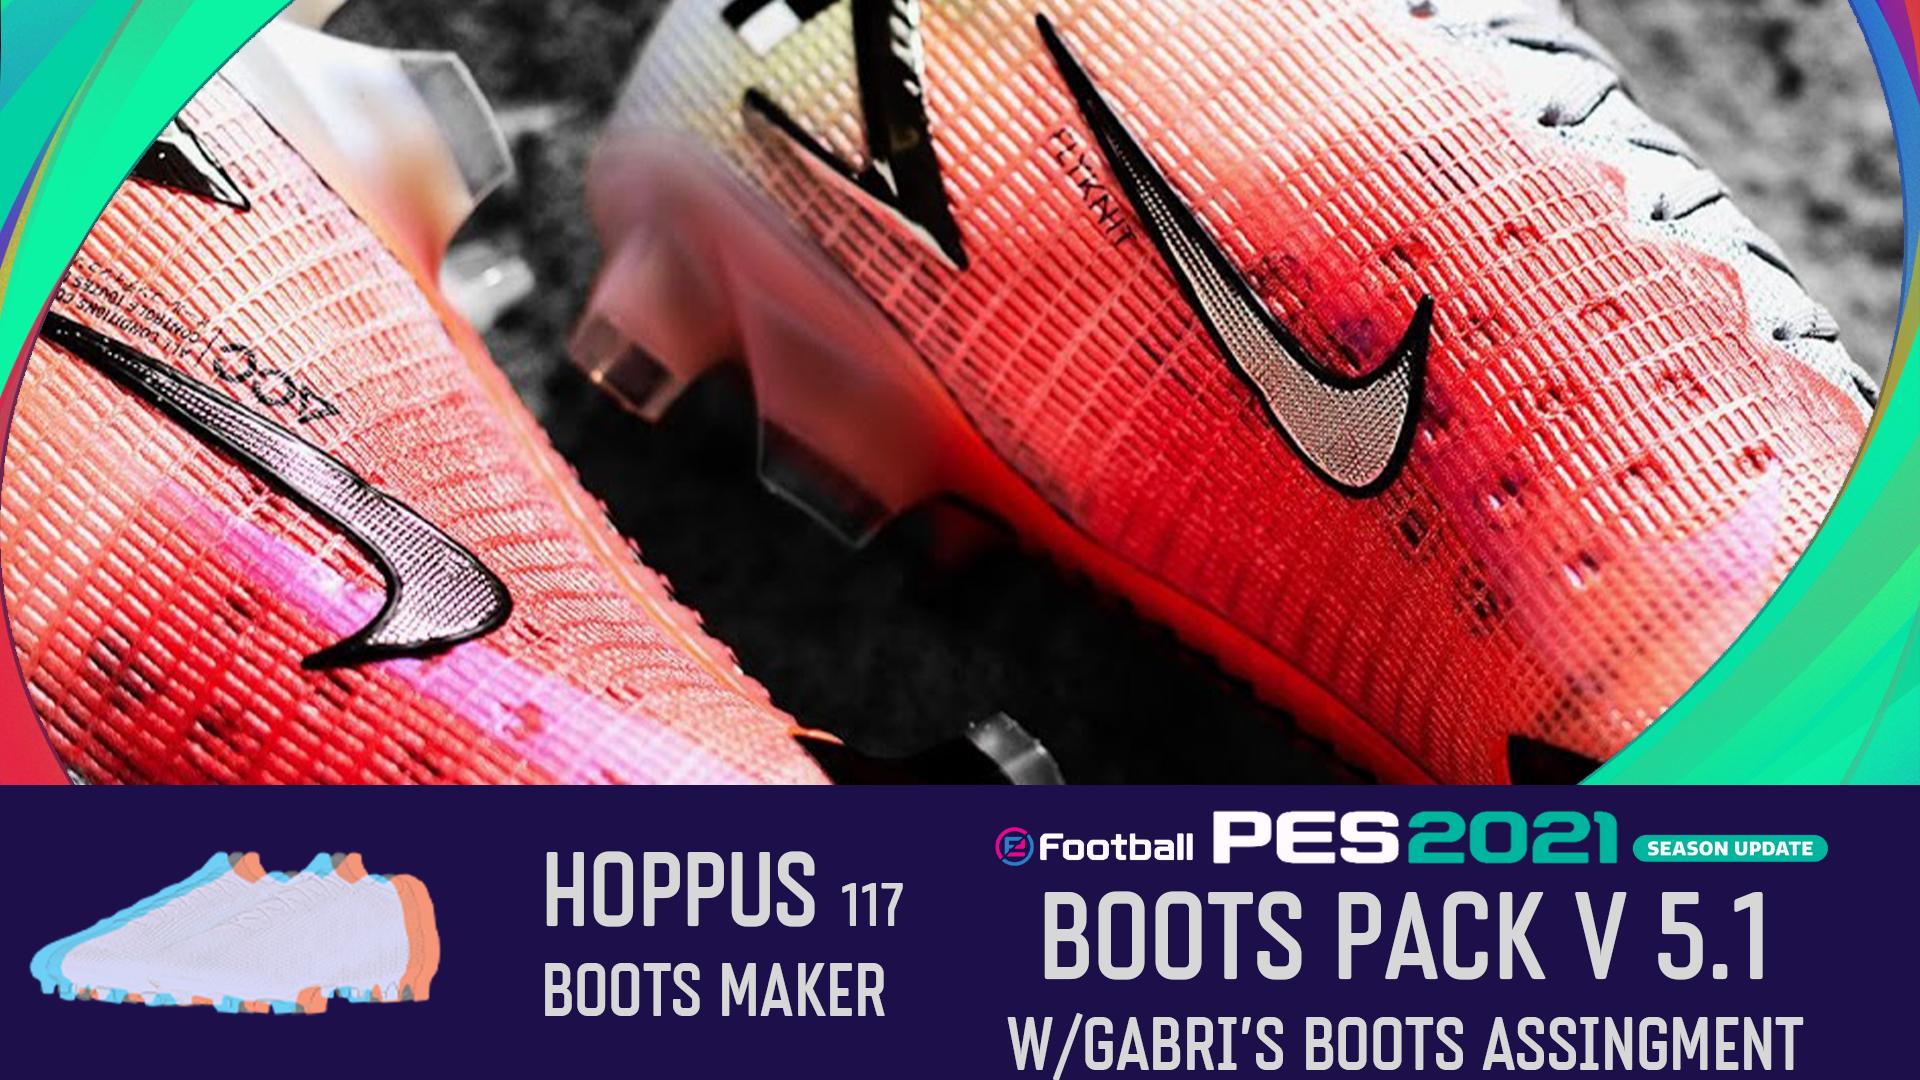 Efootball Pes 21 Season Update Bootspack V5 1 Aio By Hoppus 117 Pespatchs